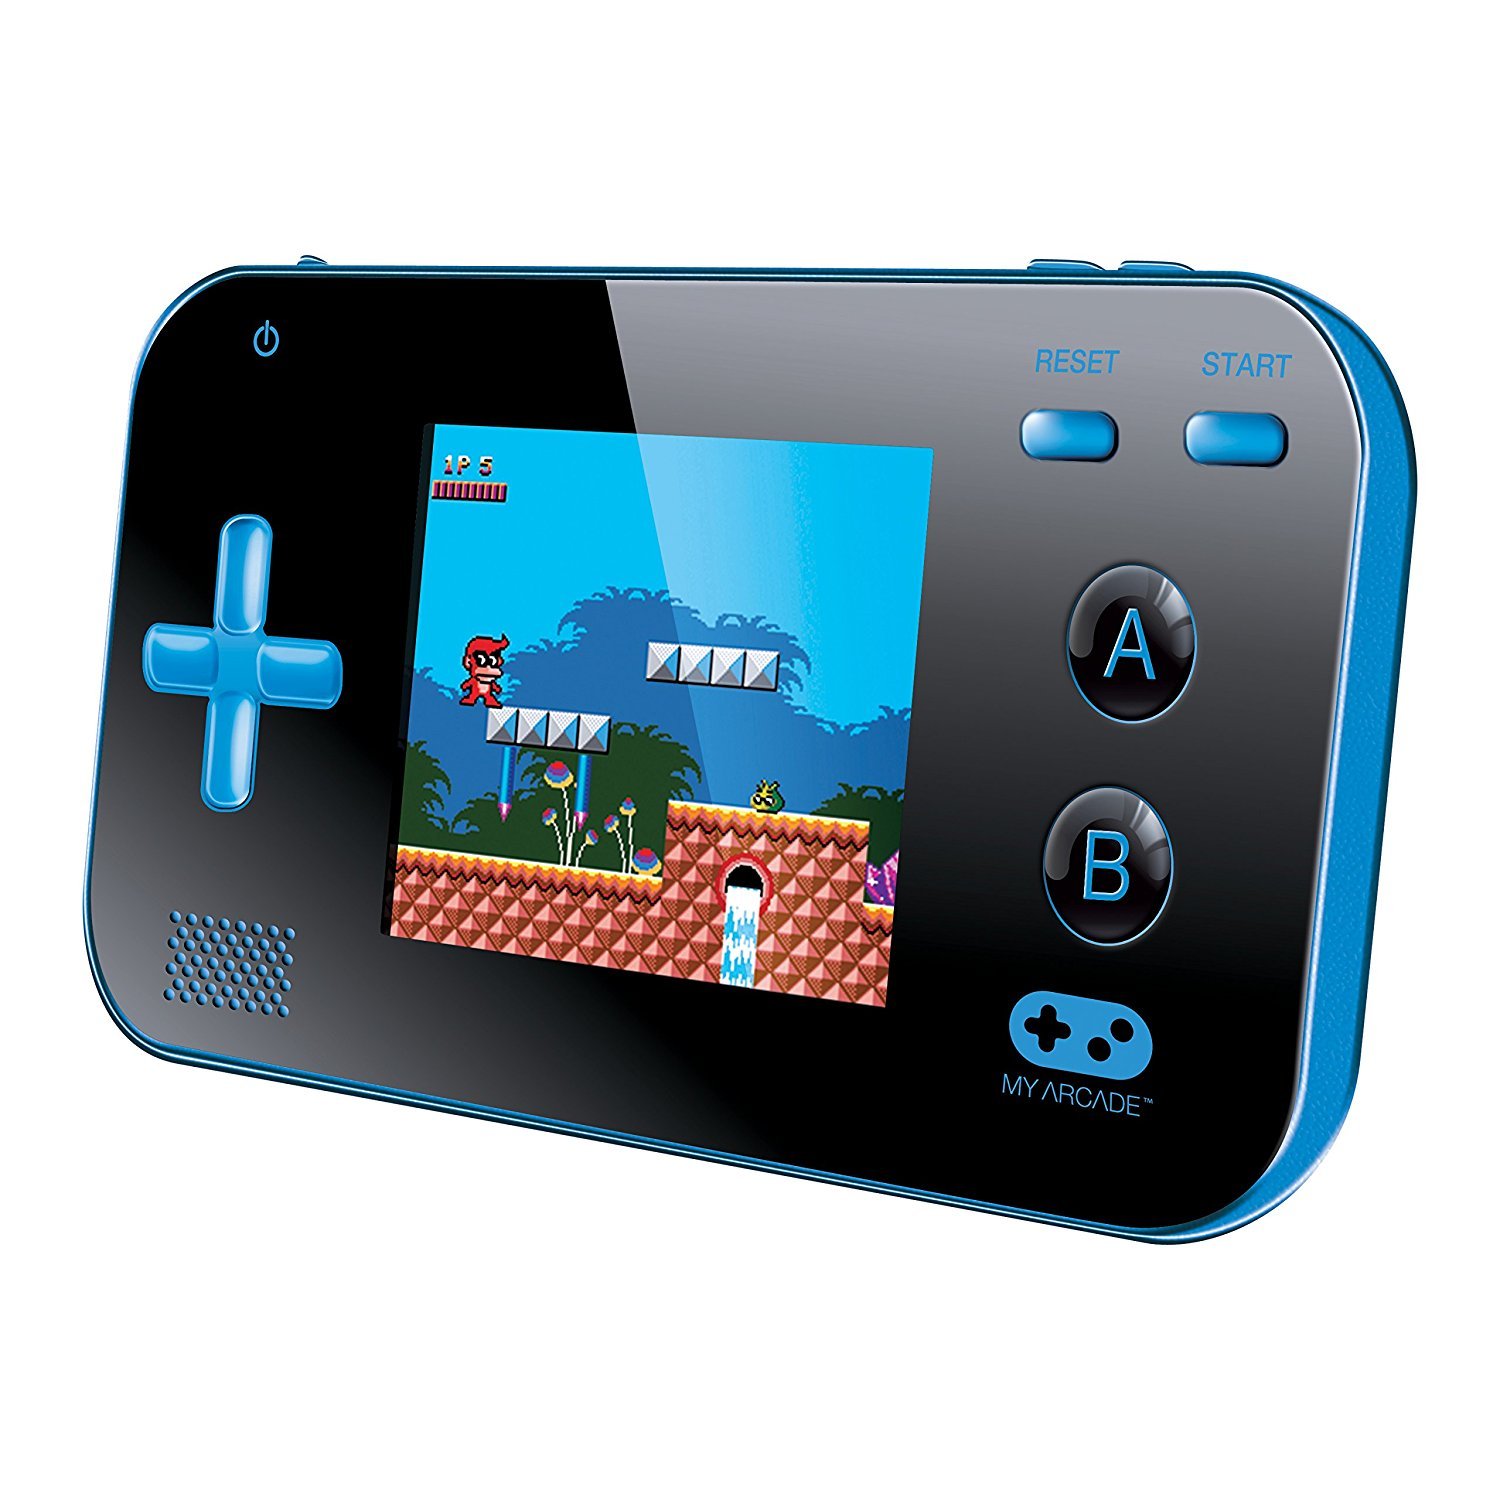 Retro Style Games Handheld Console 